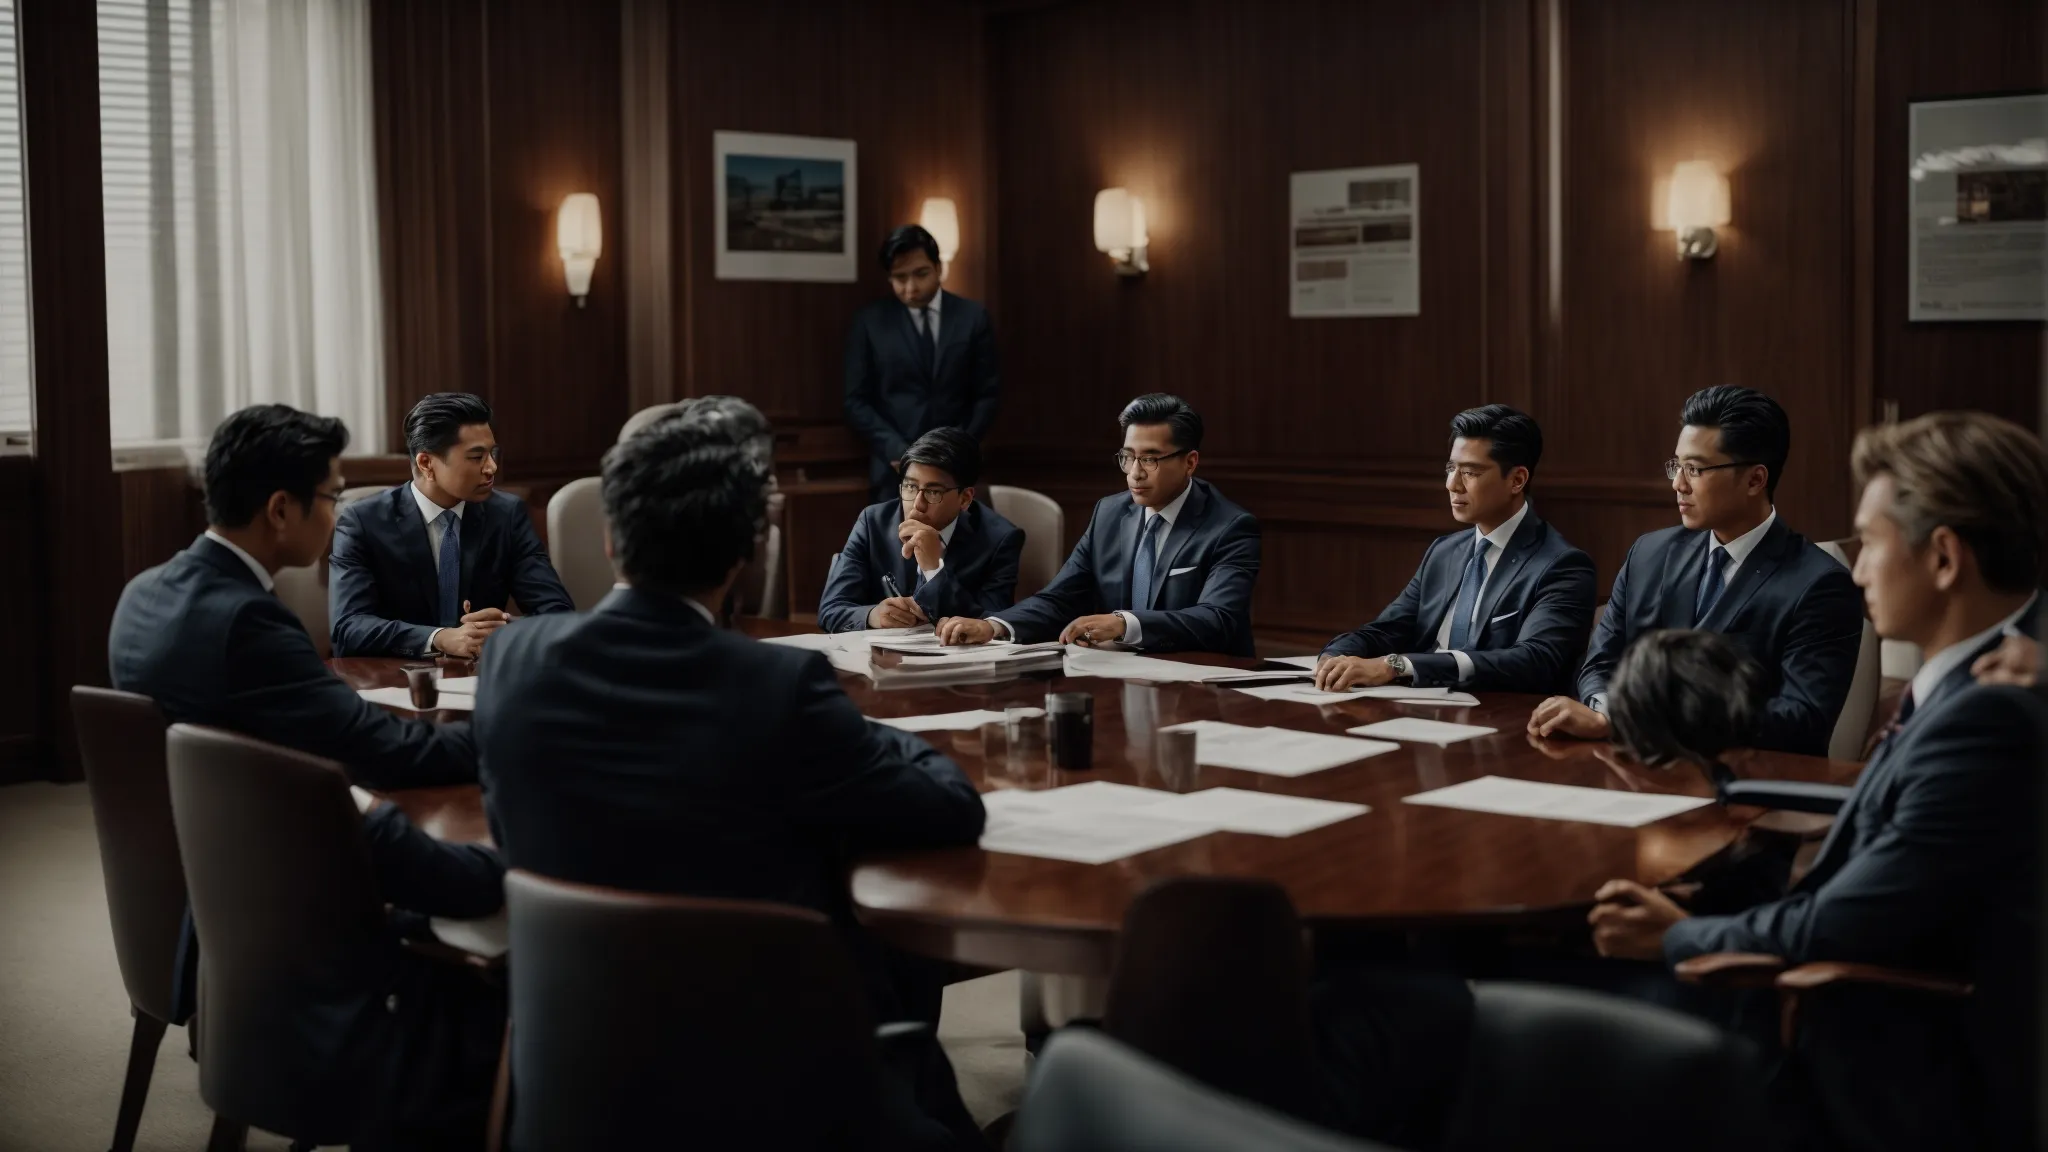 a group of suited professionals seated around a conference table, discussing documents.